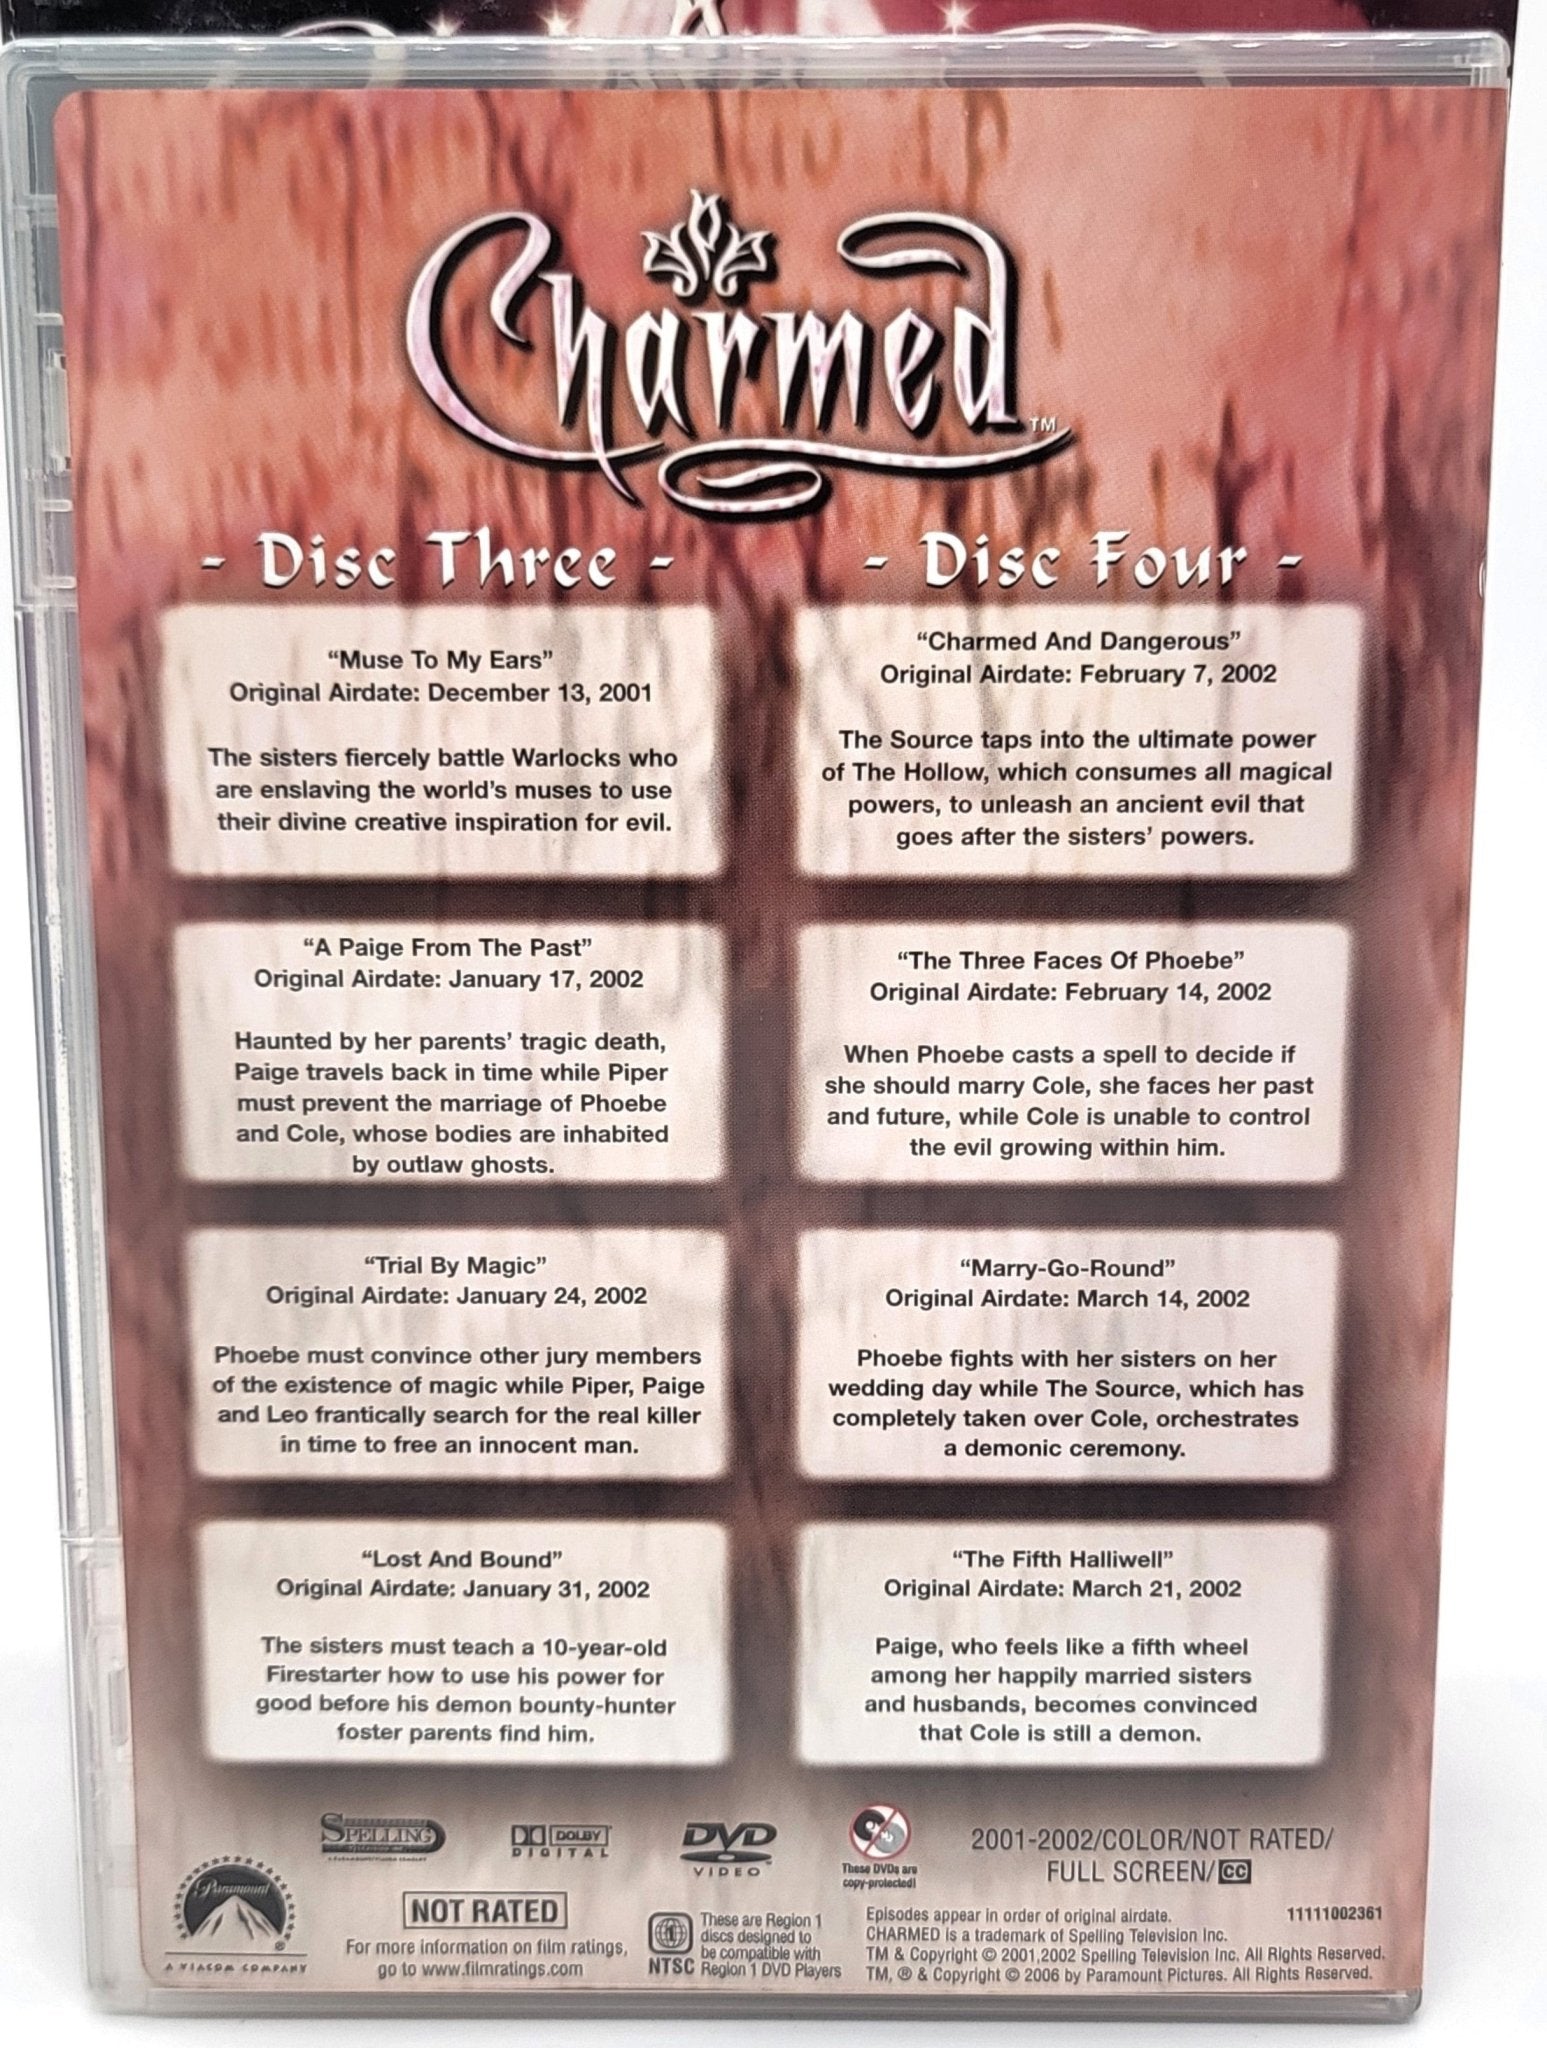 Paramount Pictures Home Entertainment - Charmed | DVD | The Complete Fourth Season - DVD - Steady Bunny Shop